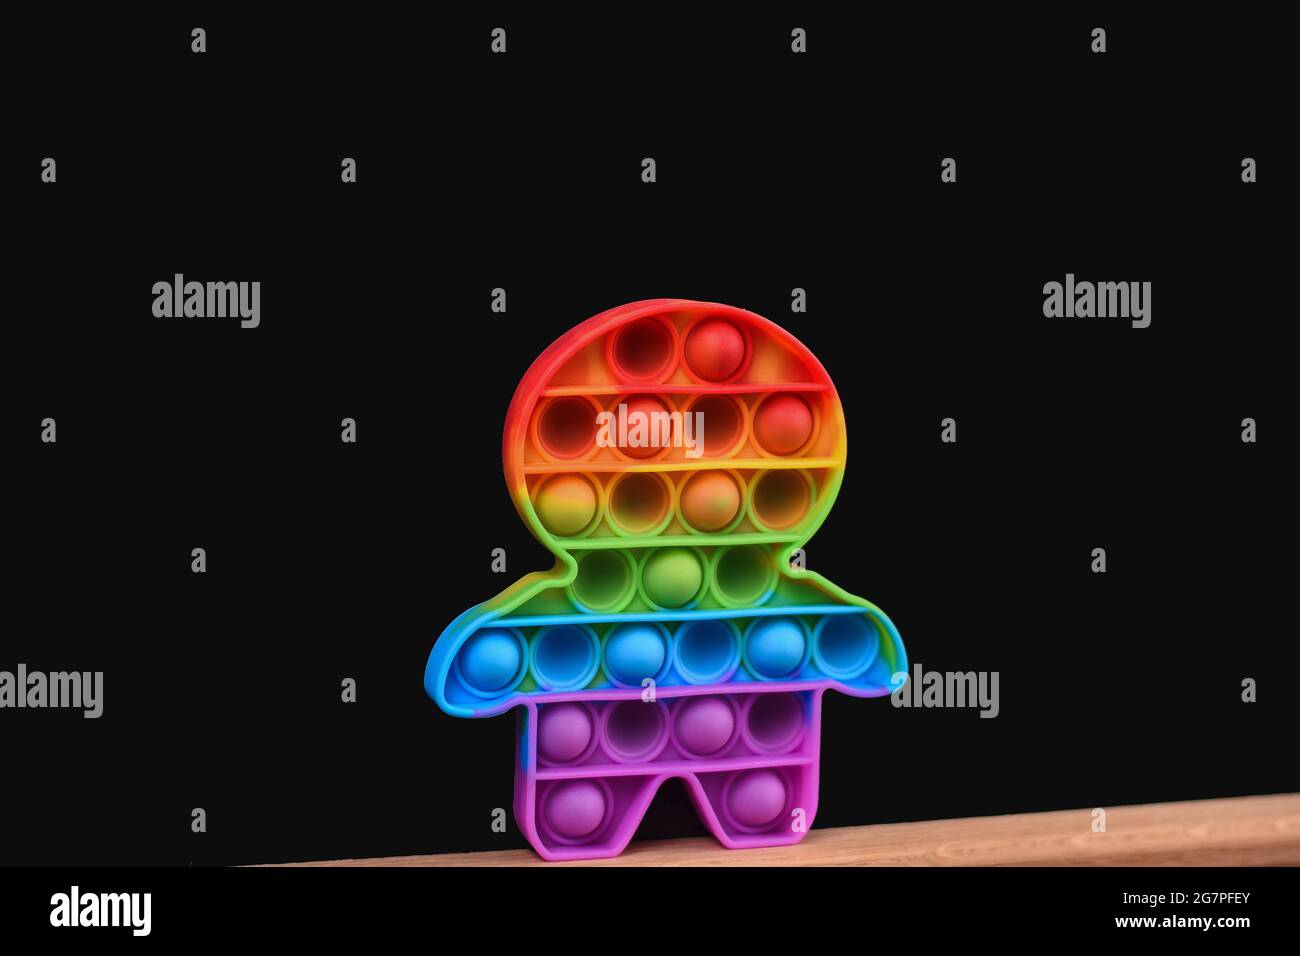 Rainbow Pop it in the form of a man on a black background. Stock Photo